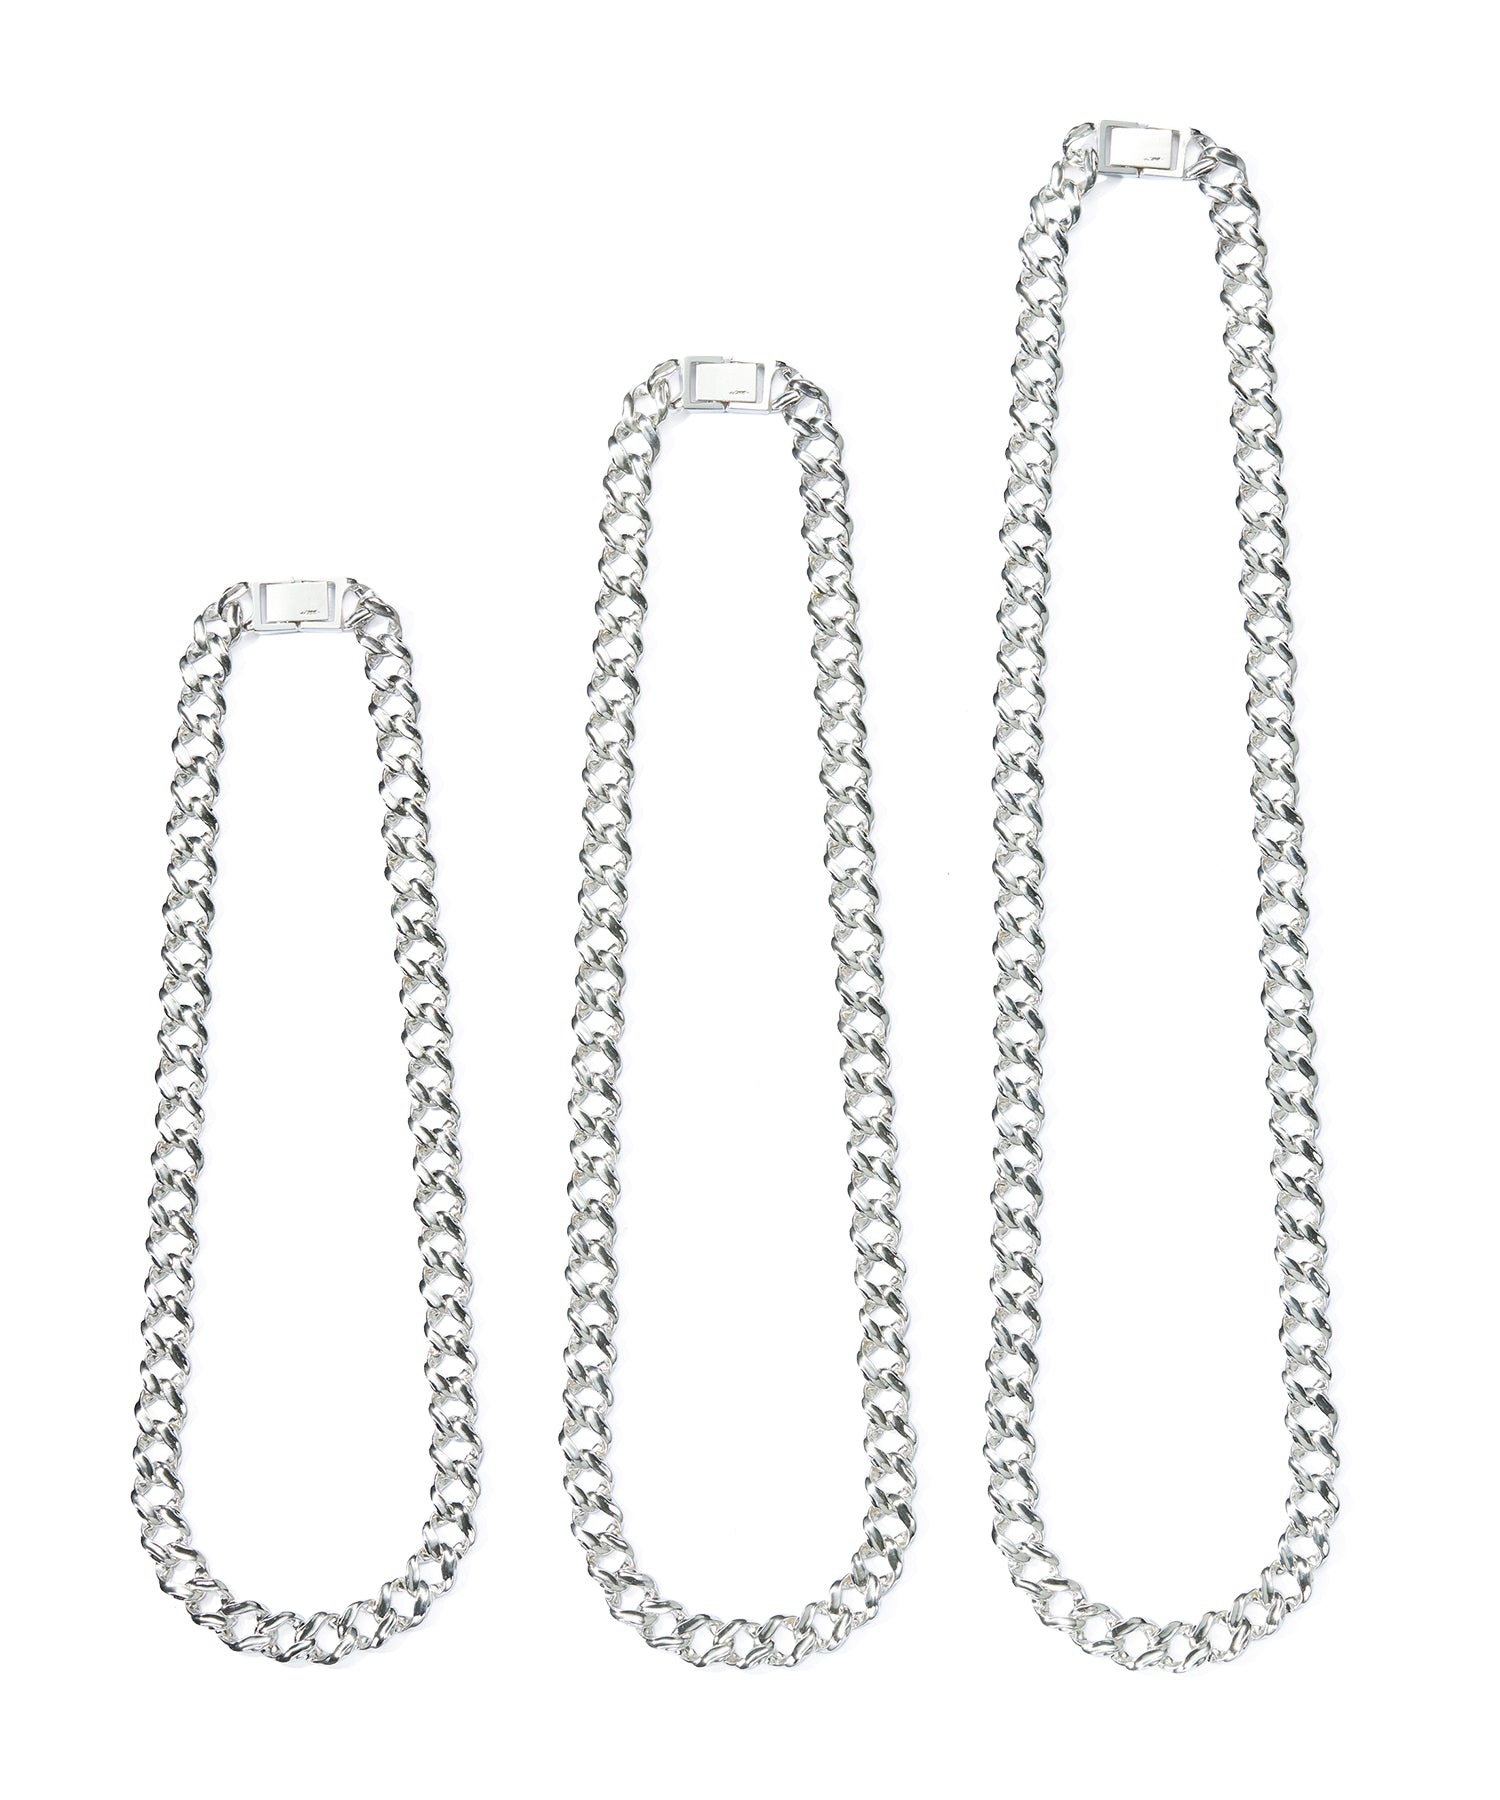 LINK CHAIN SKIN SILVER NECKLACE MIDDLE